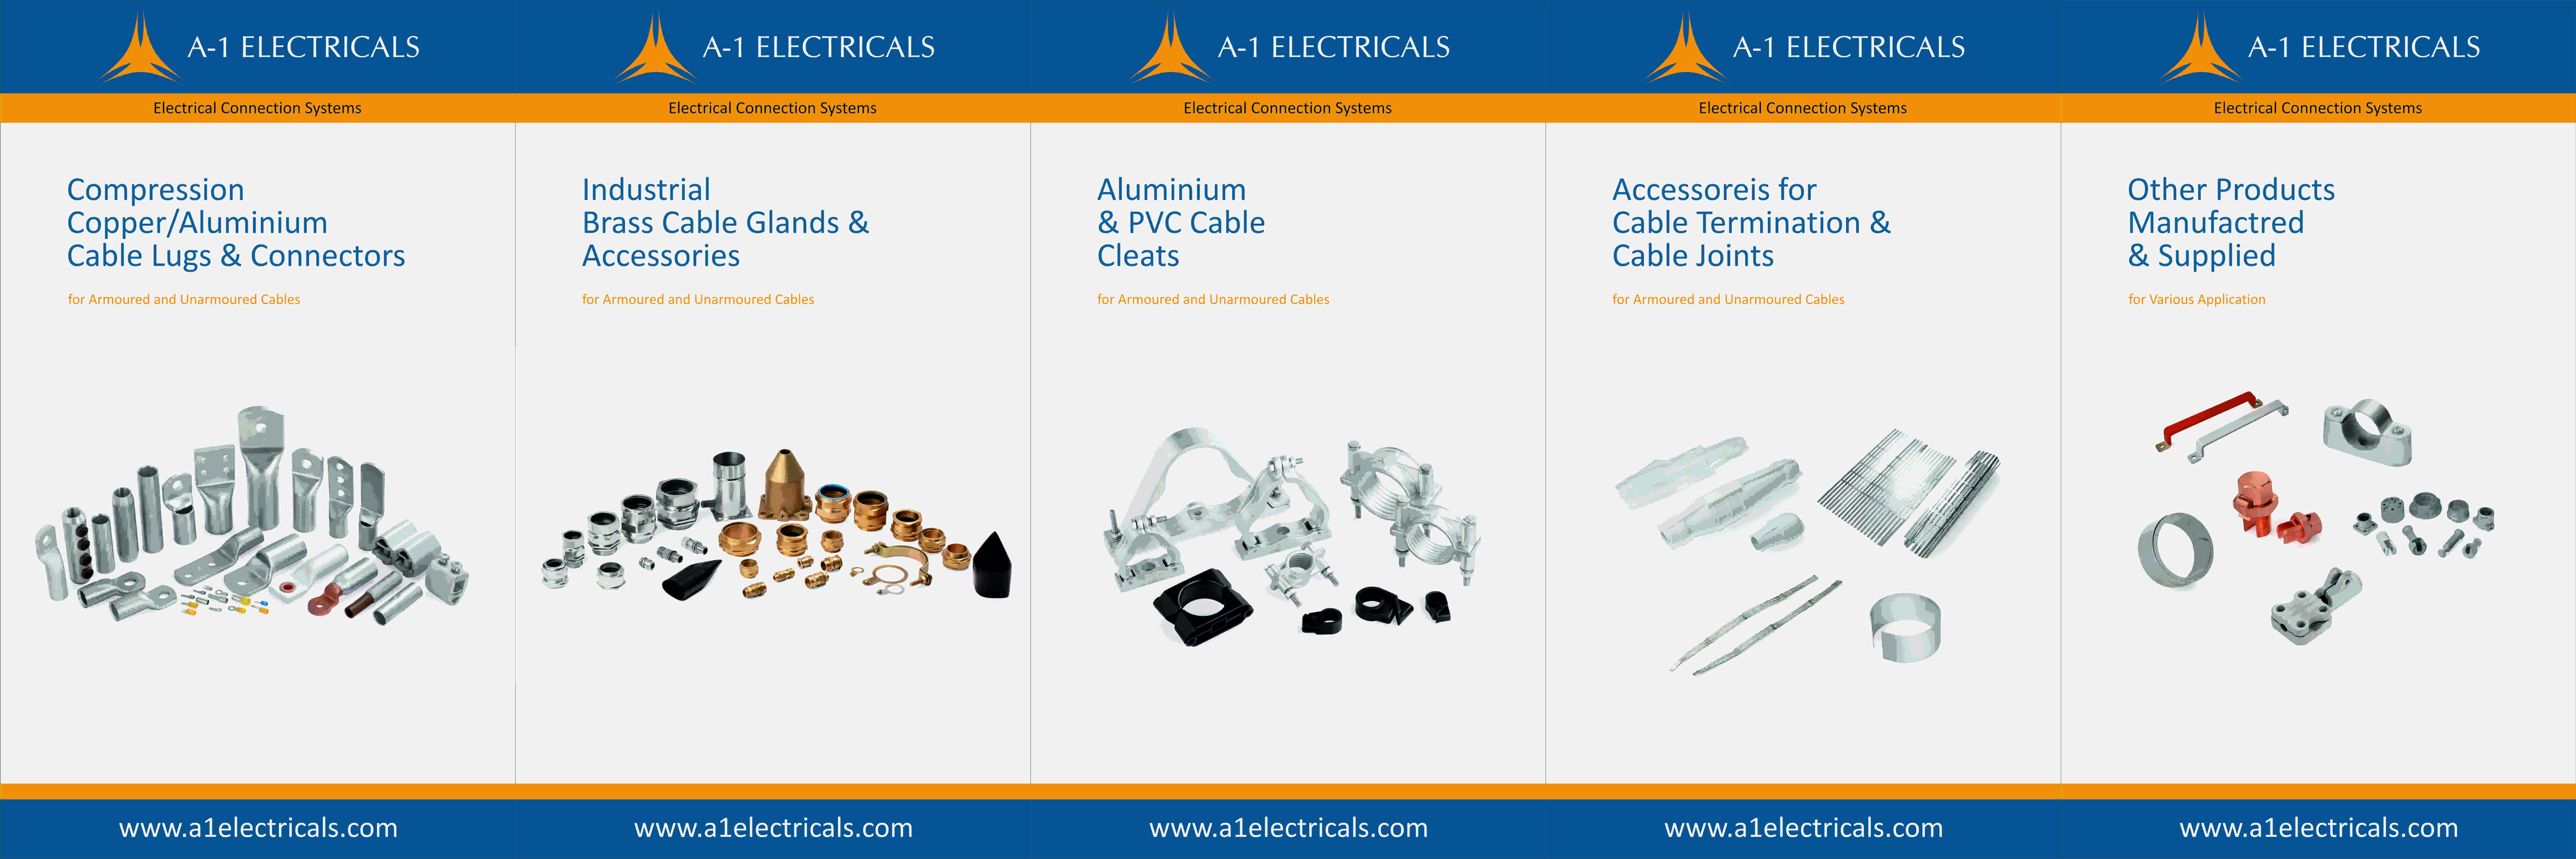 A-1 Electricals